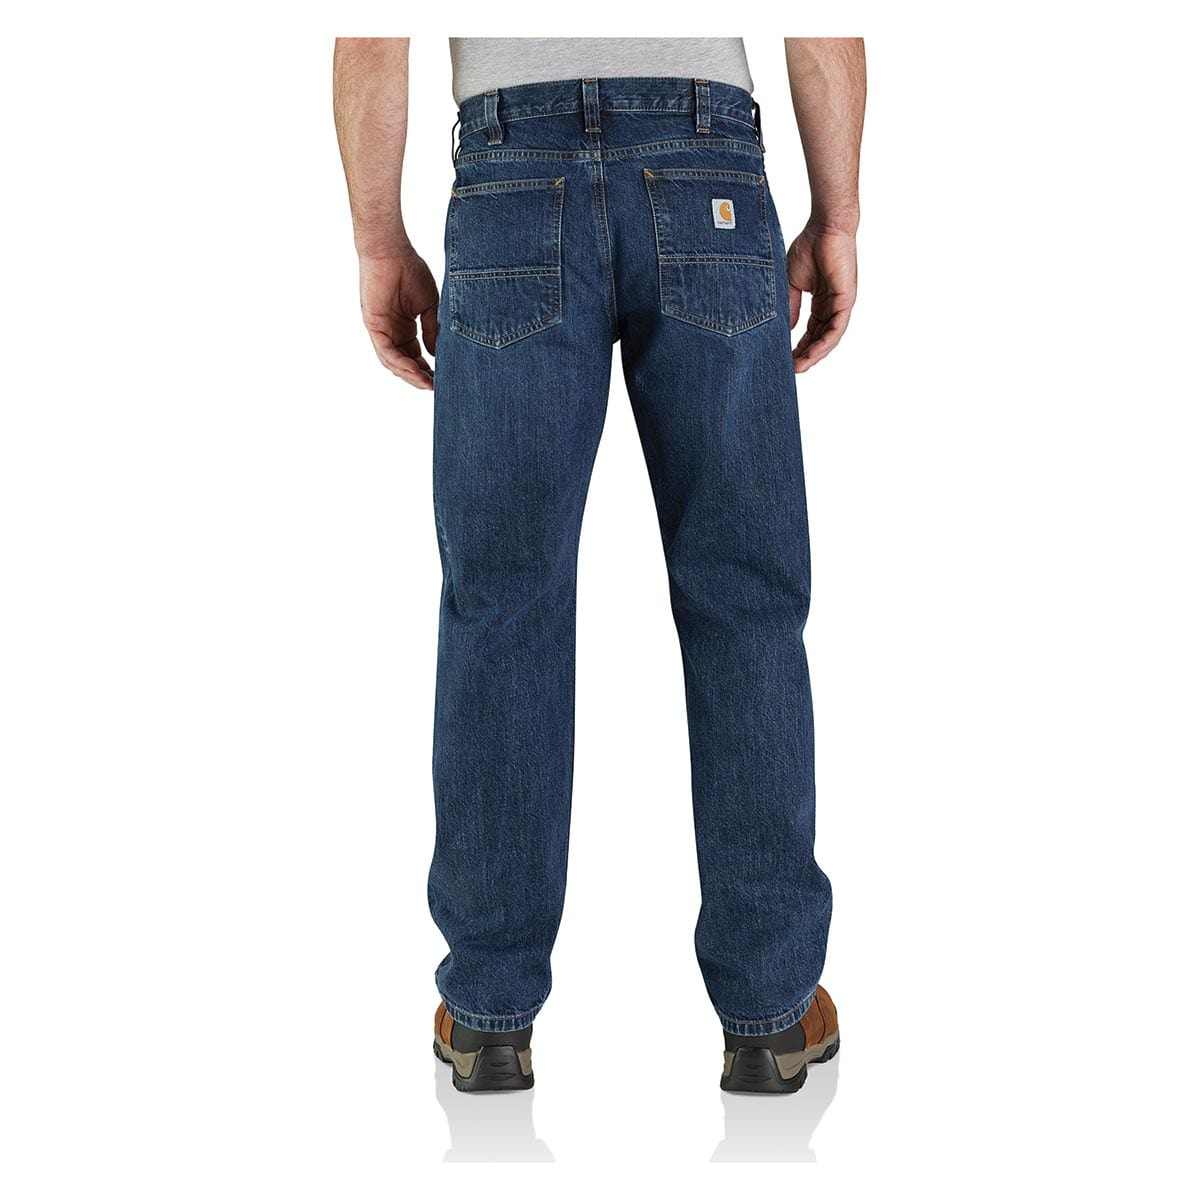 Carhartt Relaxed Fit 5-Pocket Jean